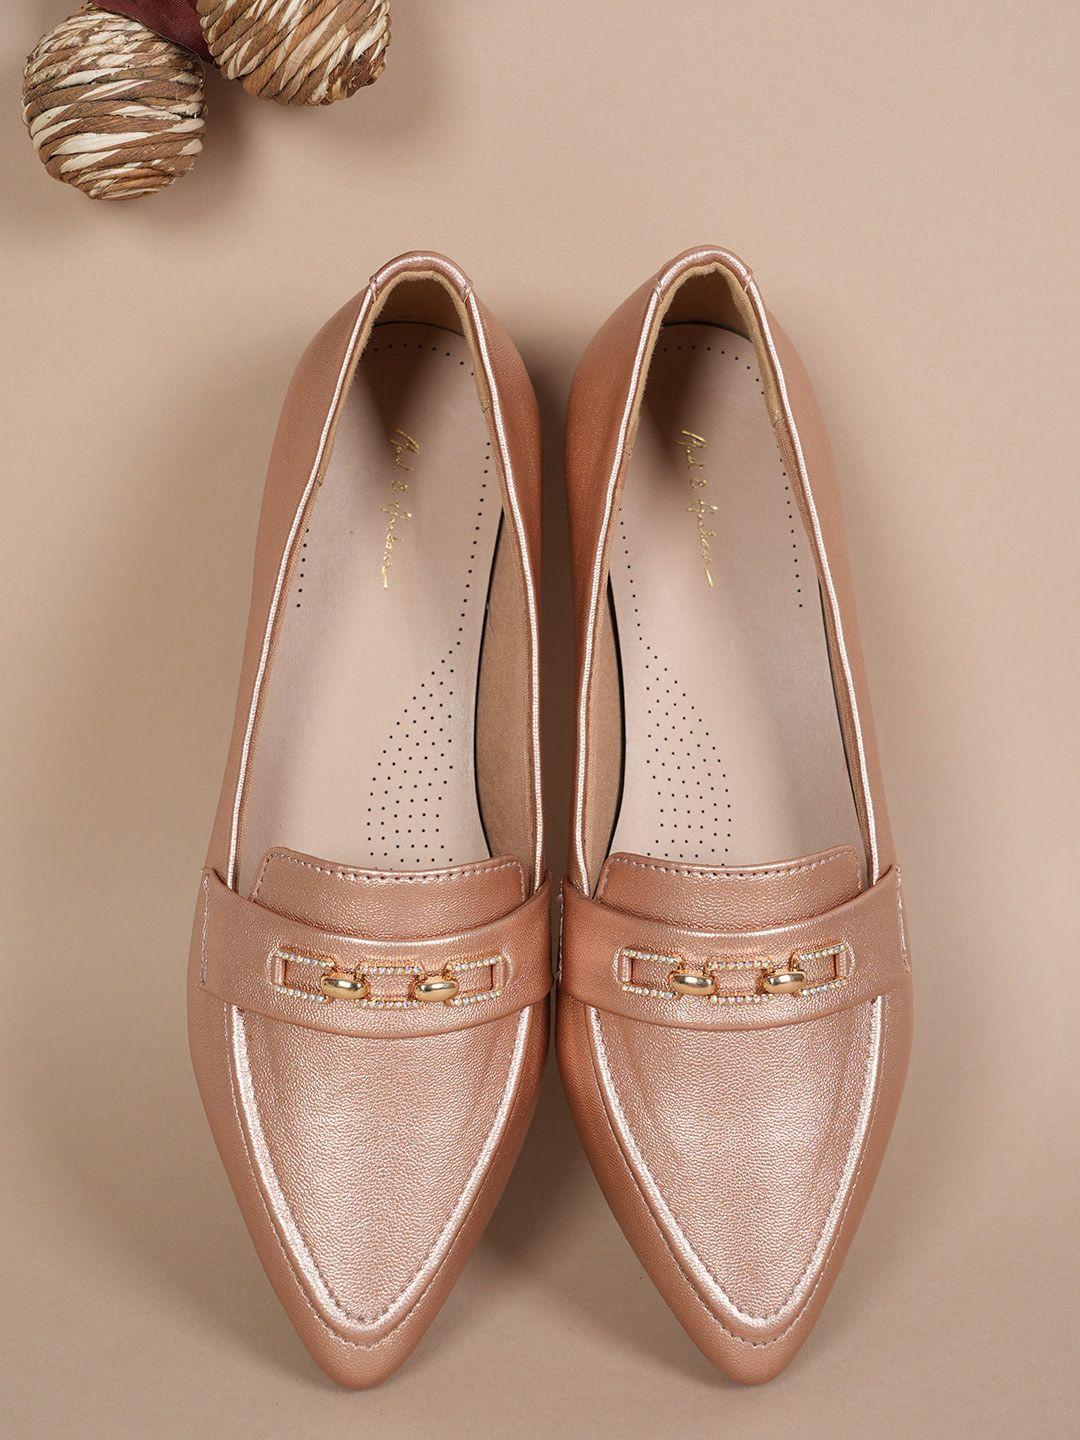 mast-&-harbour-women-embellished-party-ballerinas-flats